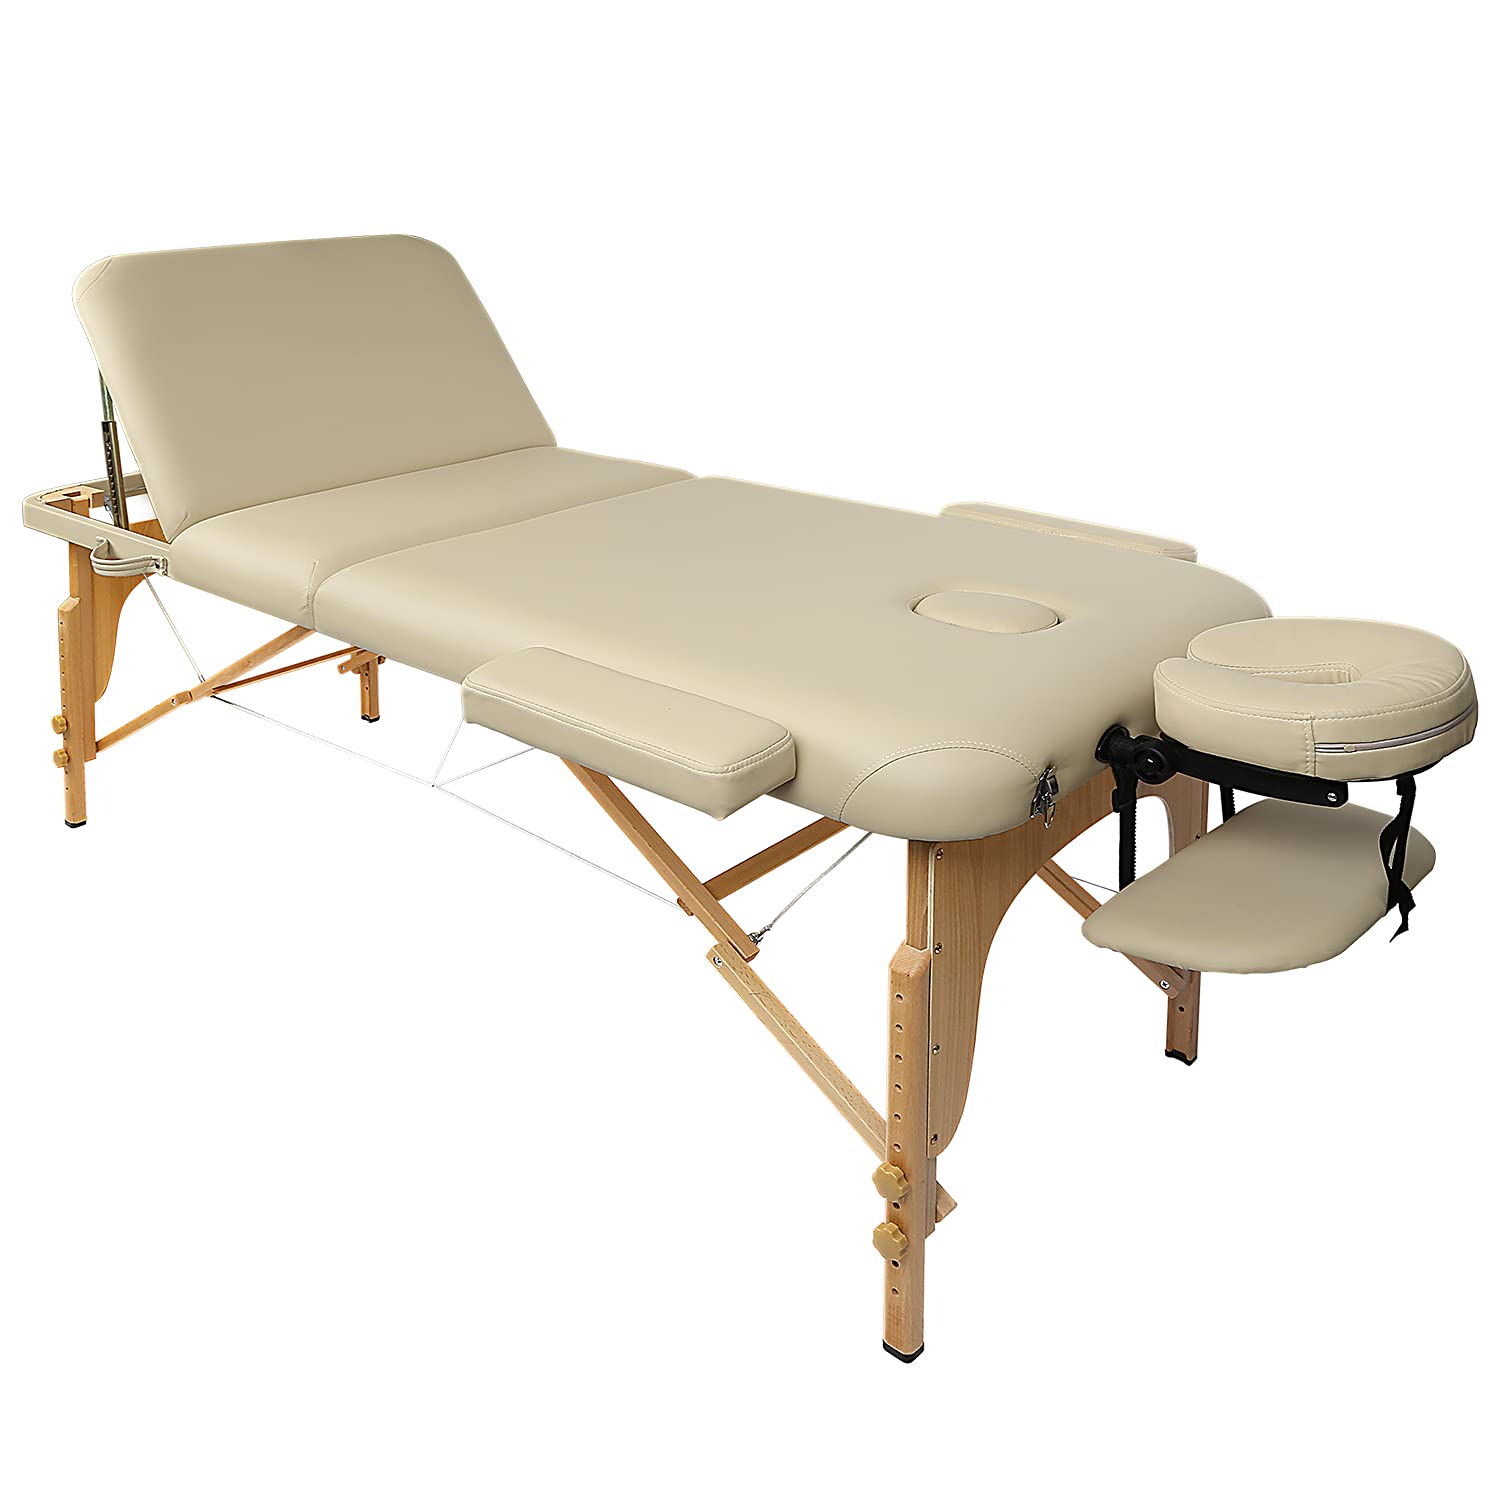 Load image into Gallery viewer, Massage Table Portable Massage Bed Lash Bed with Carrying Bag, Spa, Salon, Lash, Facial Bed Treatment Height Adjustable with Head- &amp; Armrest 3-Fold (White)
